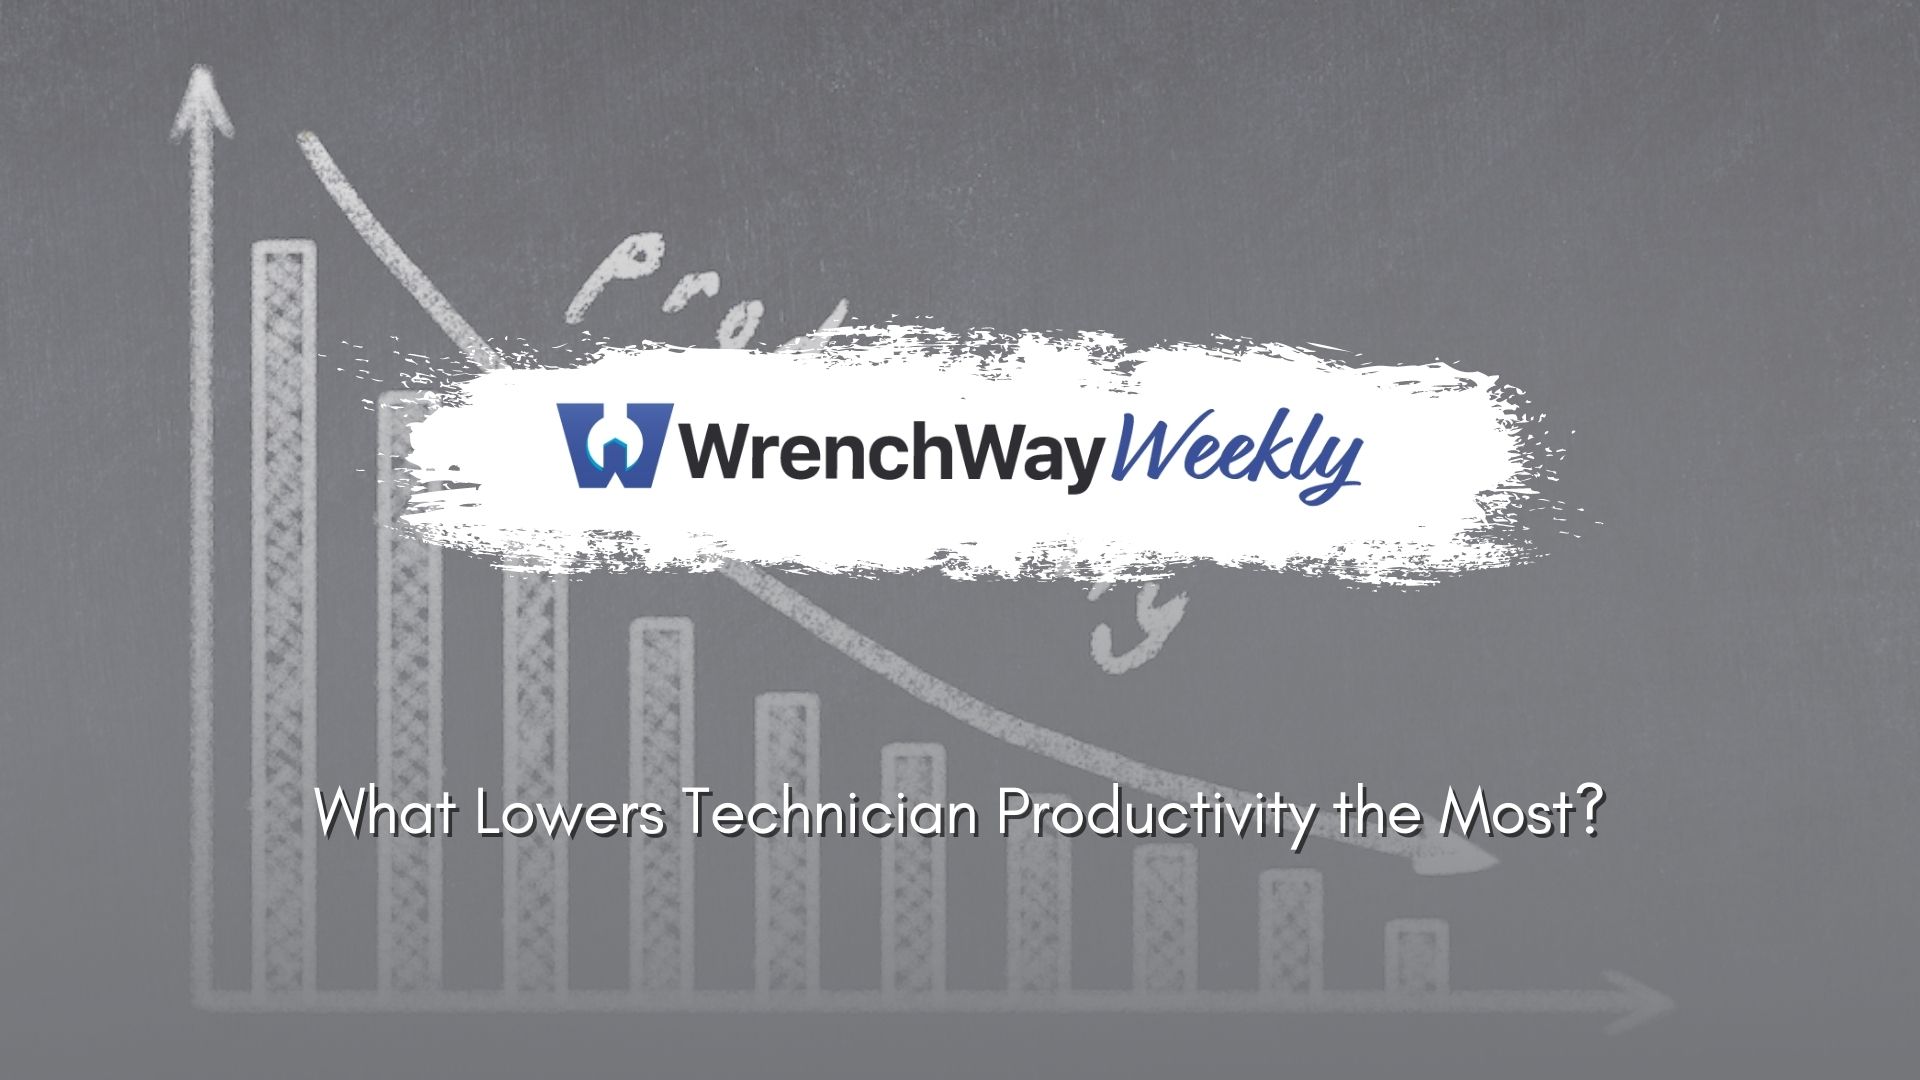 wrenchway weekly on what lowers technician productivity the most?